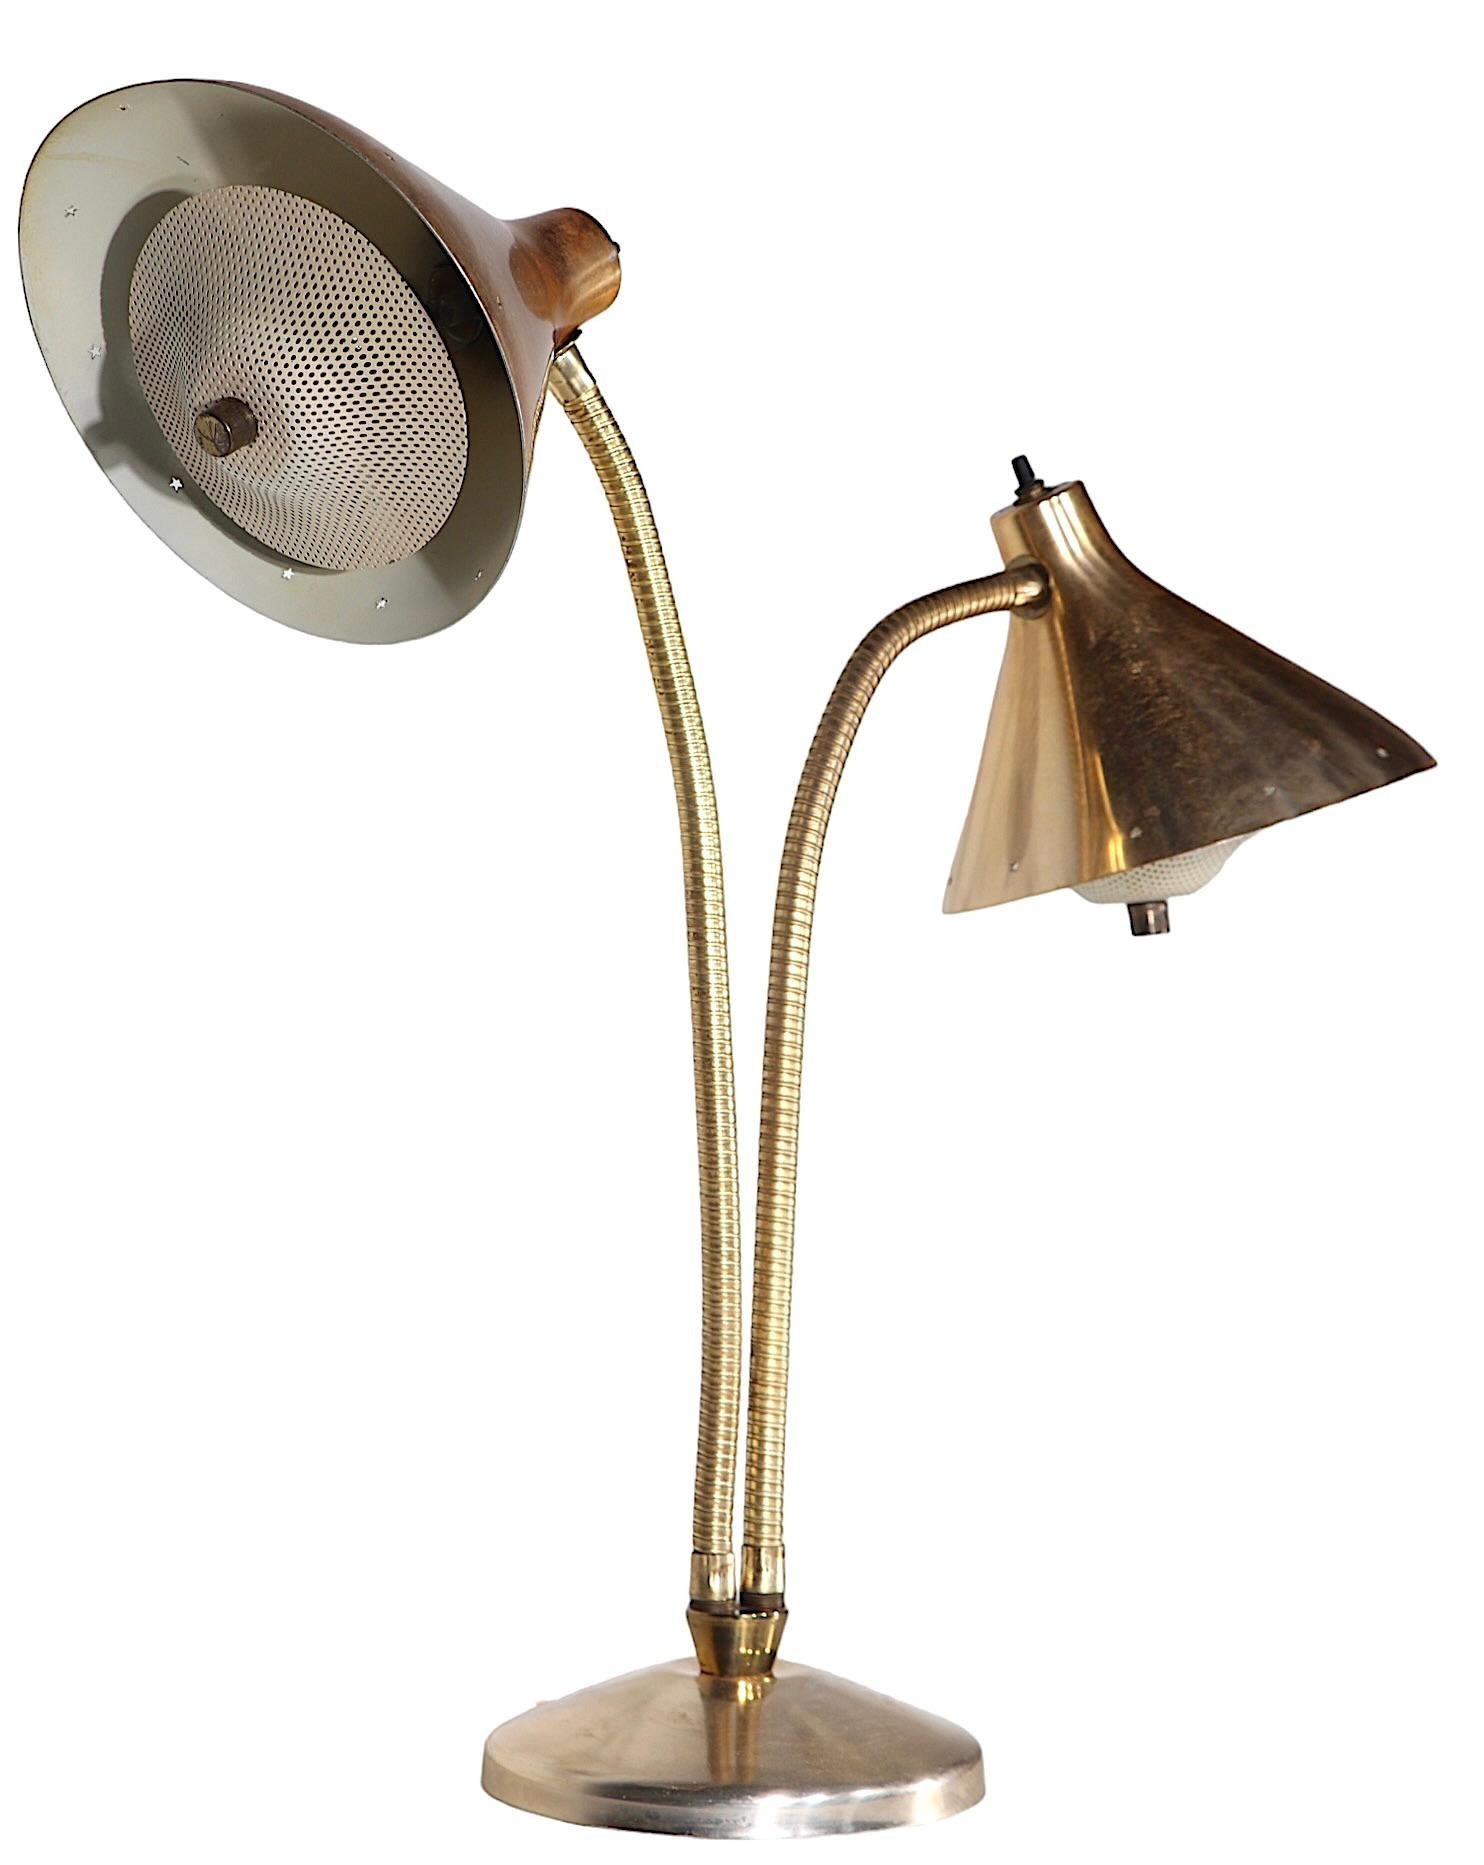 Chic two light  flex arm desk lamp, constructed of anodized gold/brass tone aluminum, brass and steel. The lamp features two hood shades, each still has its original perforated clip on diffuser. Possibly designed by Gerald Thurston, and made by